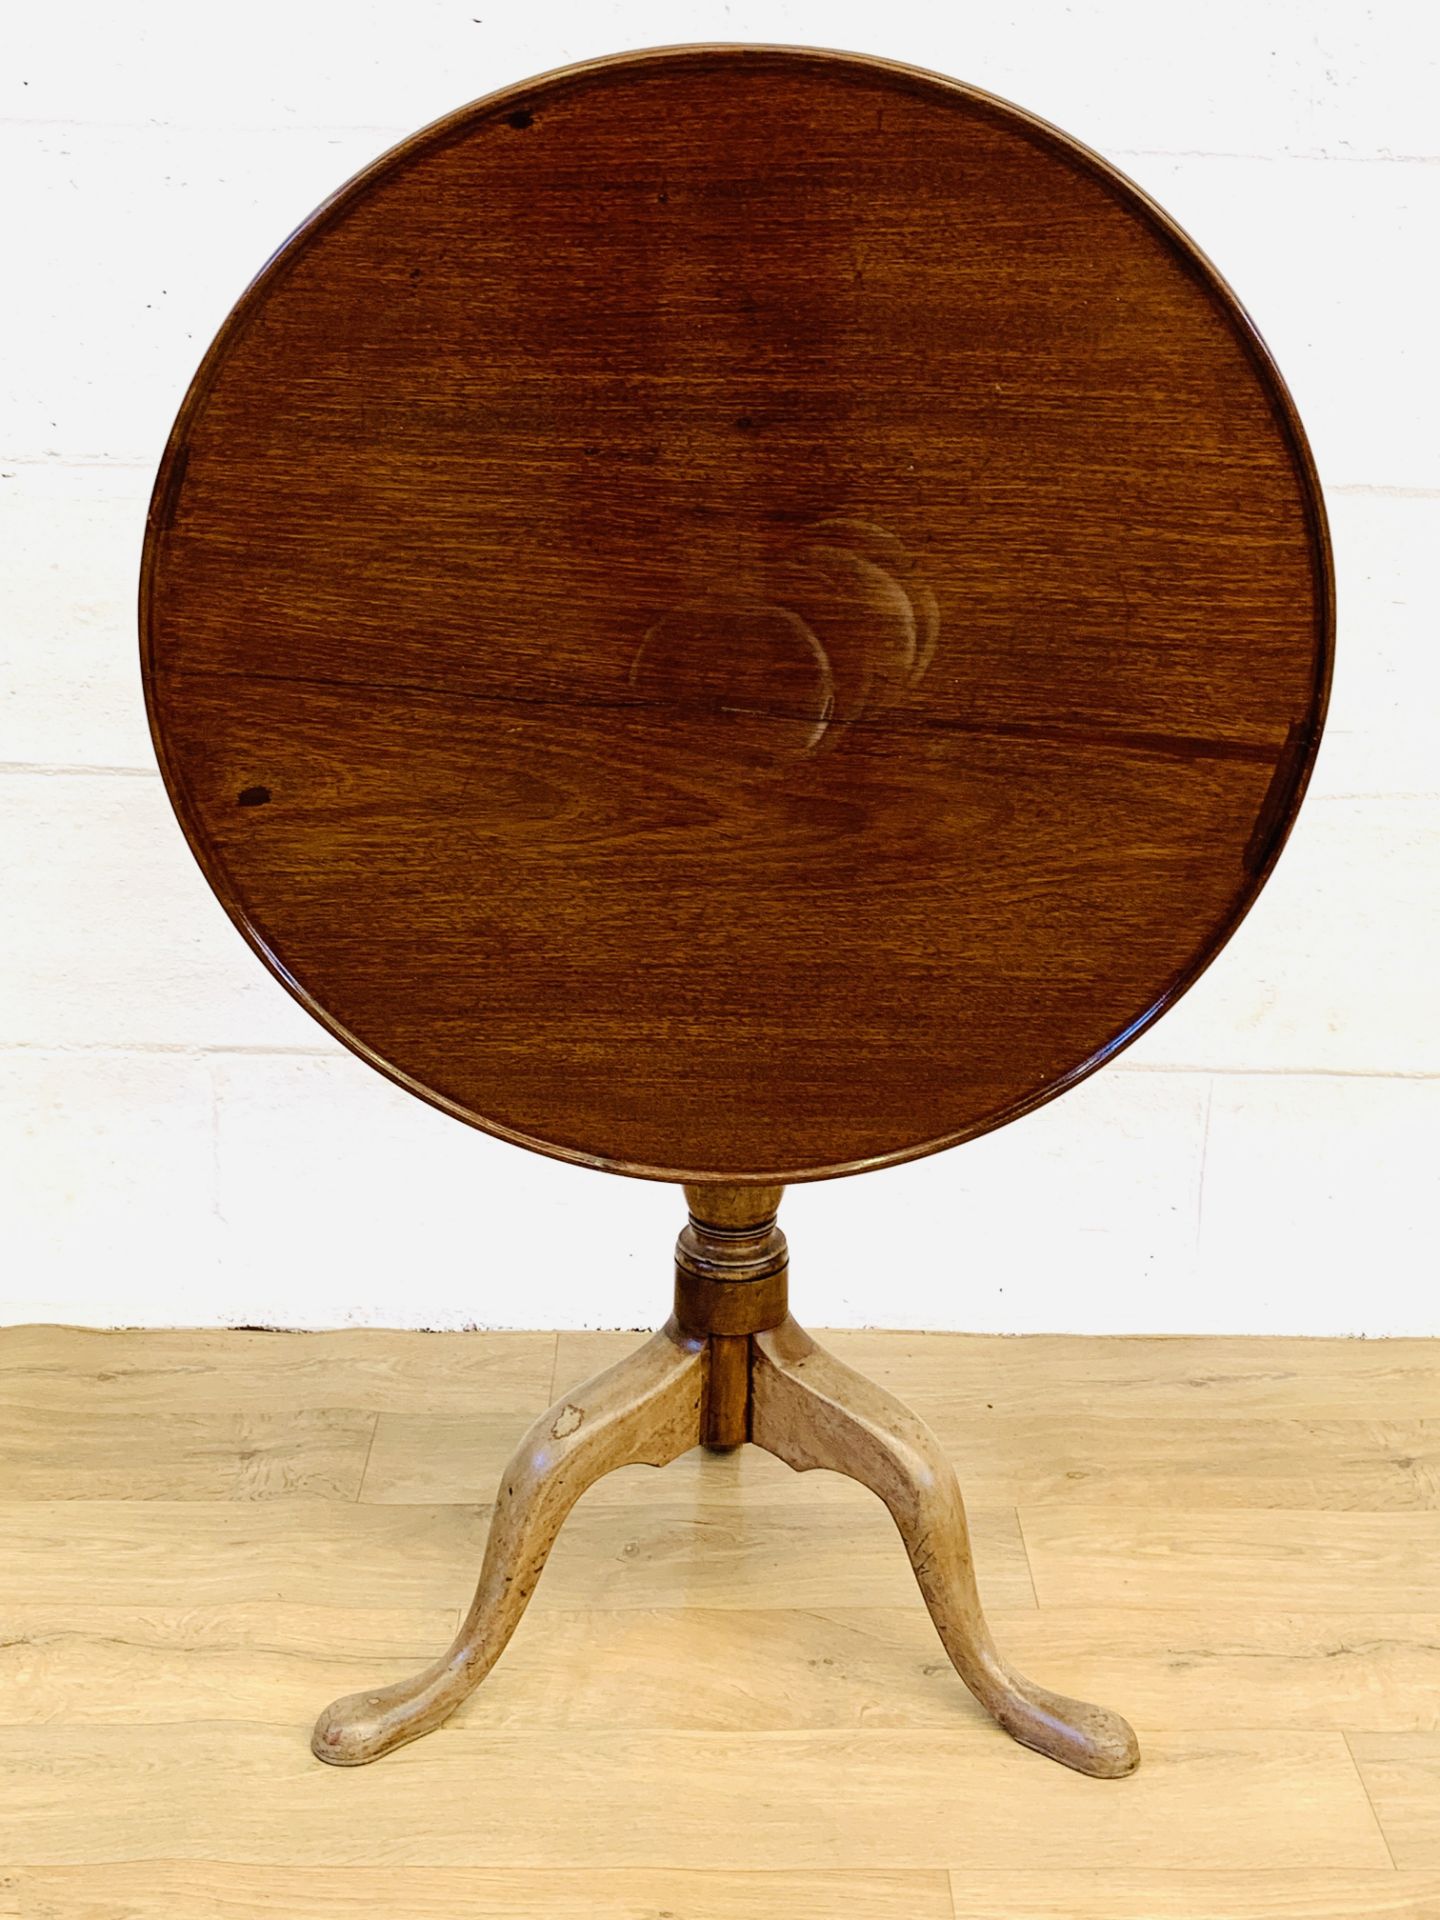 Mahogany tilt top occasional table - Image 4 of 5